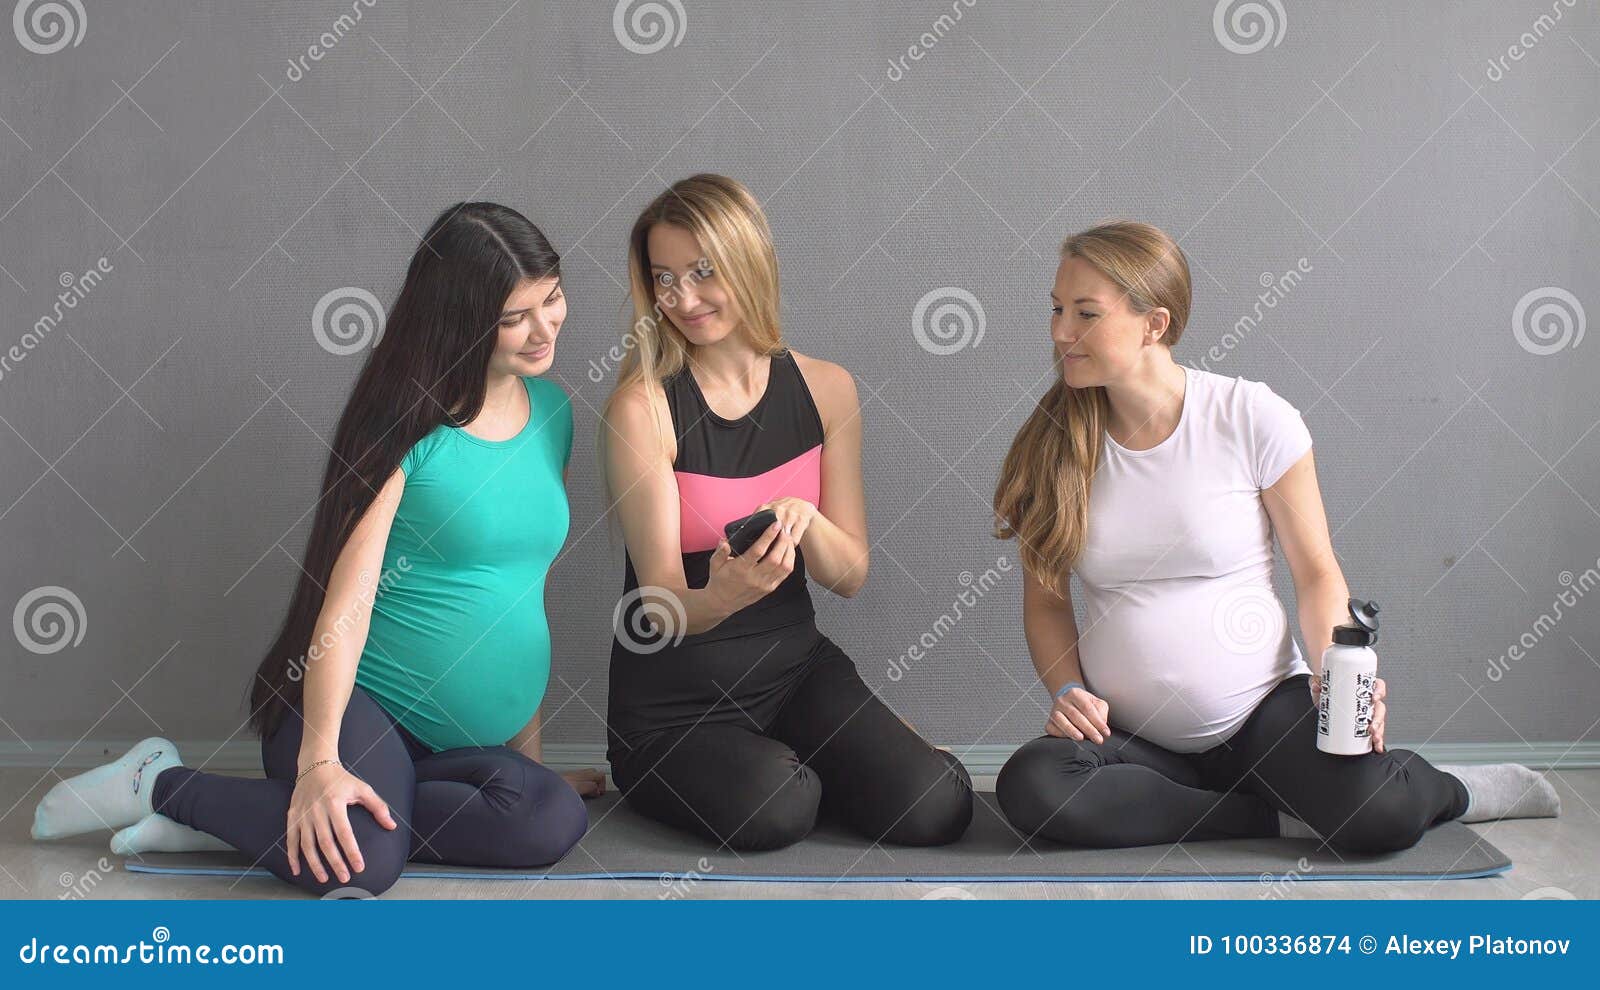 Pregnant Group Nude Girls - Group Young Pregnant Women - ASS AND PUSSY